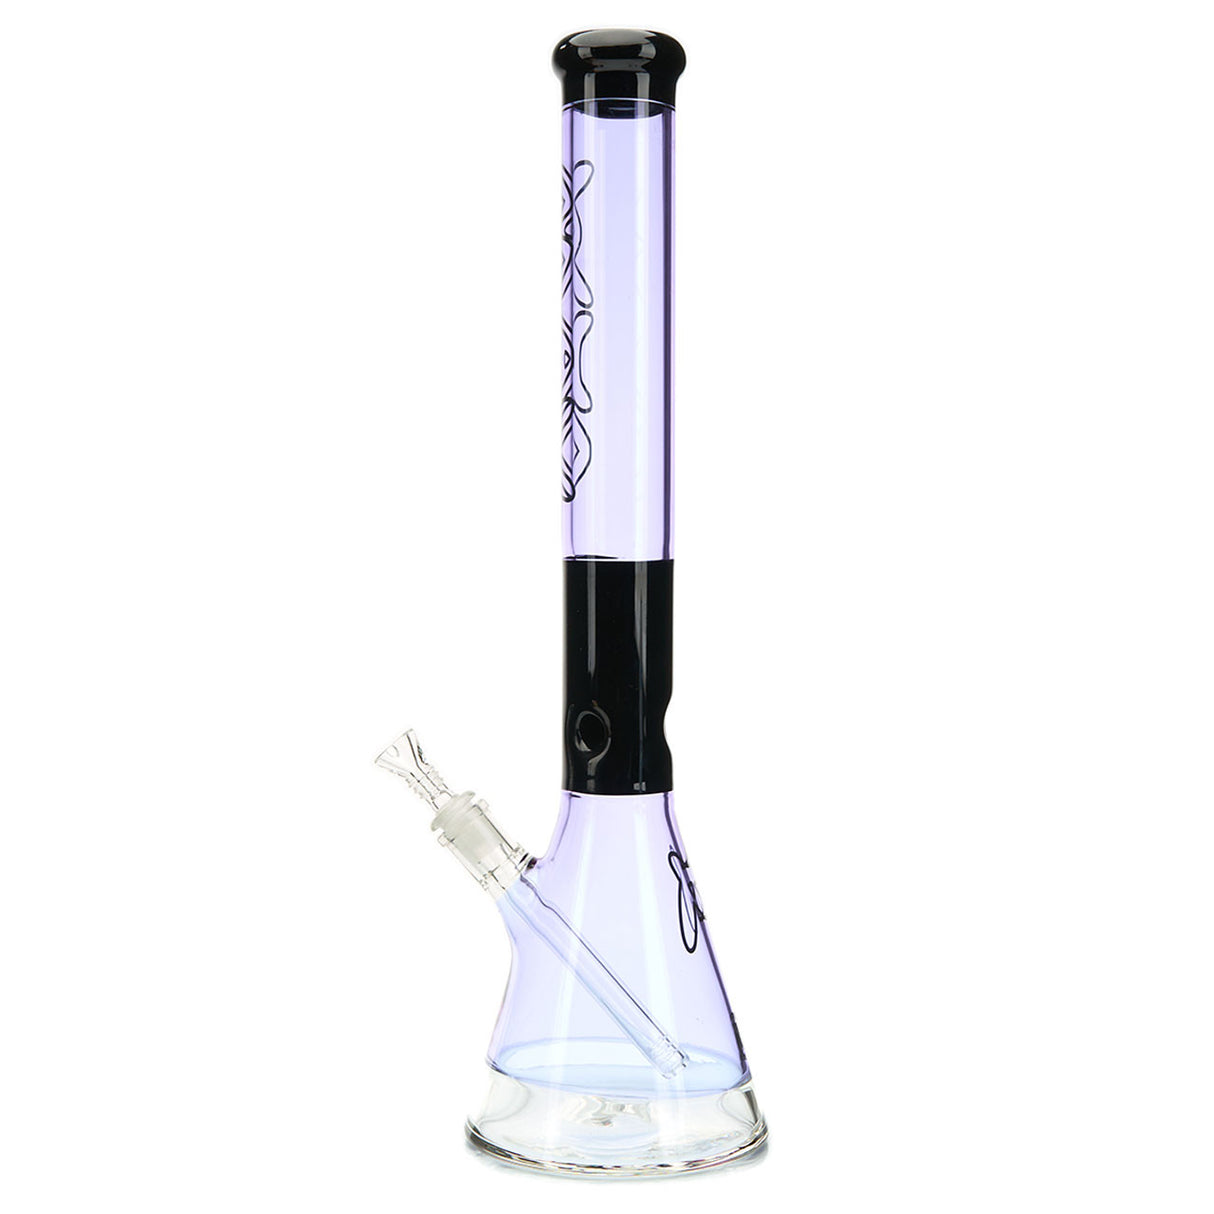 MAV Glass 18-inch beaker straight tube water pipe with two tone color purple and black